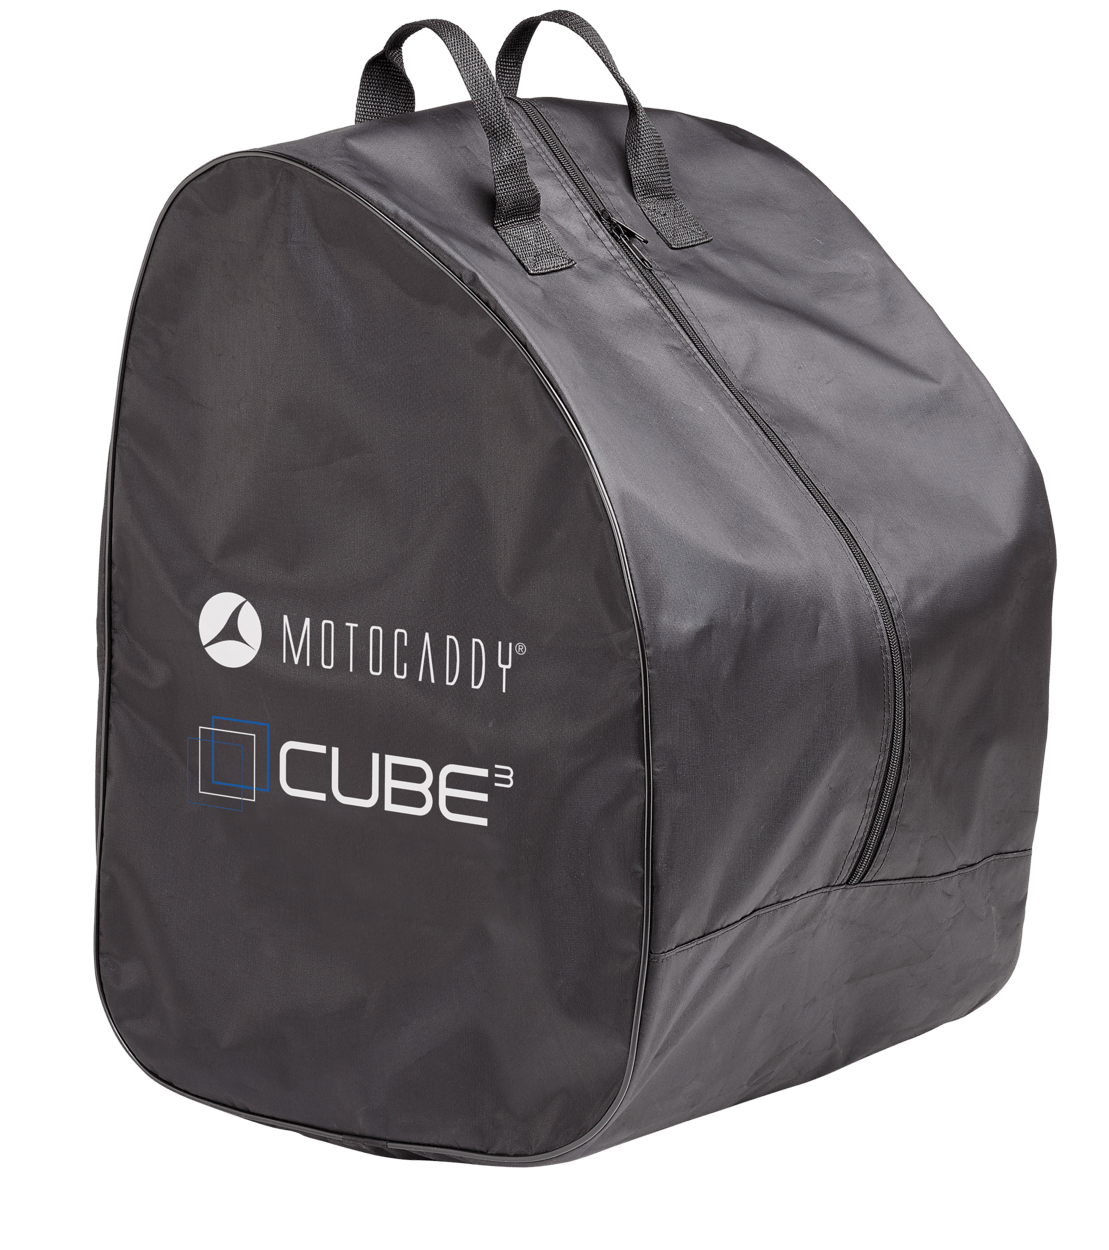 'CUBE' TROLLEY TRAVEL COVER